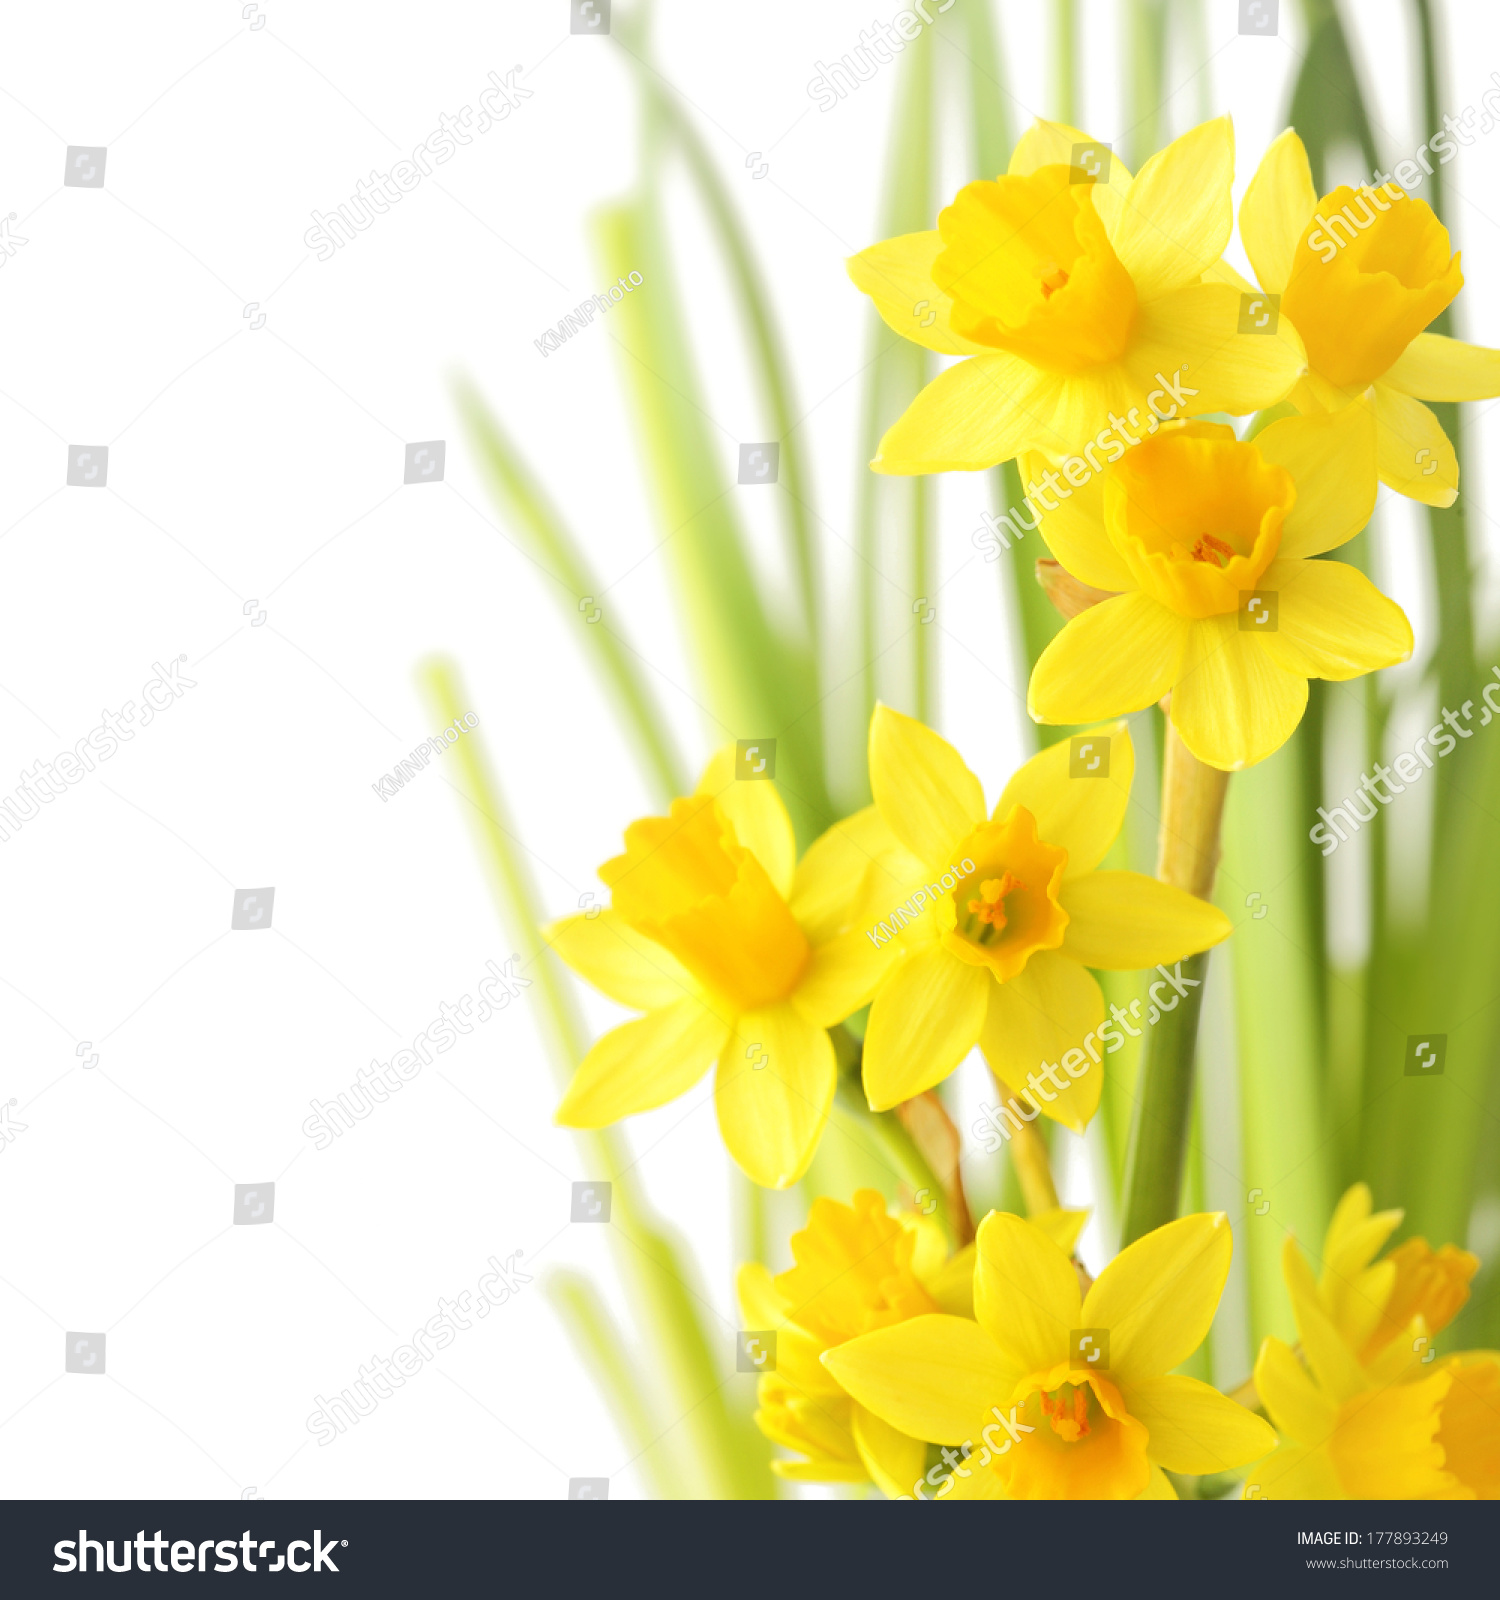 Spring Floral Border Beautiful Fresh Narcissus Stock Photo (Royalty ...